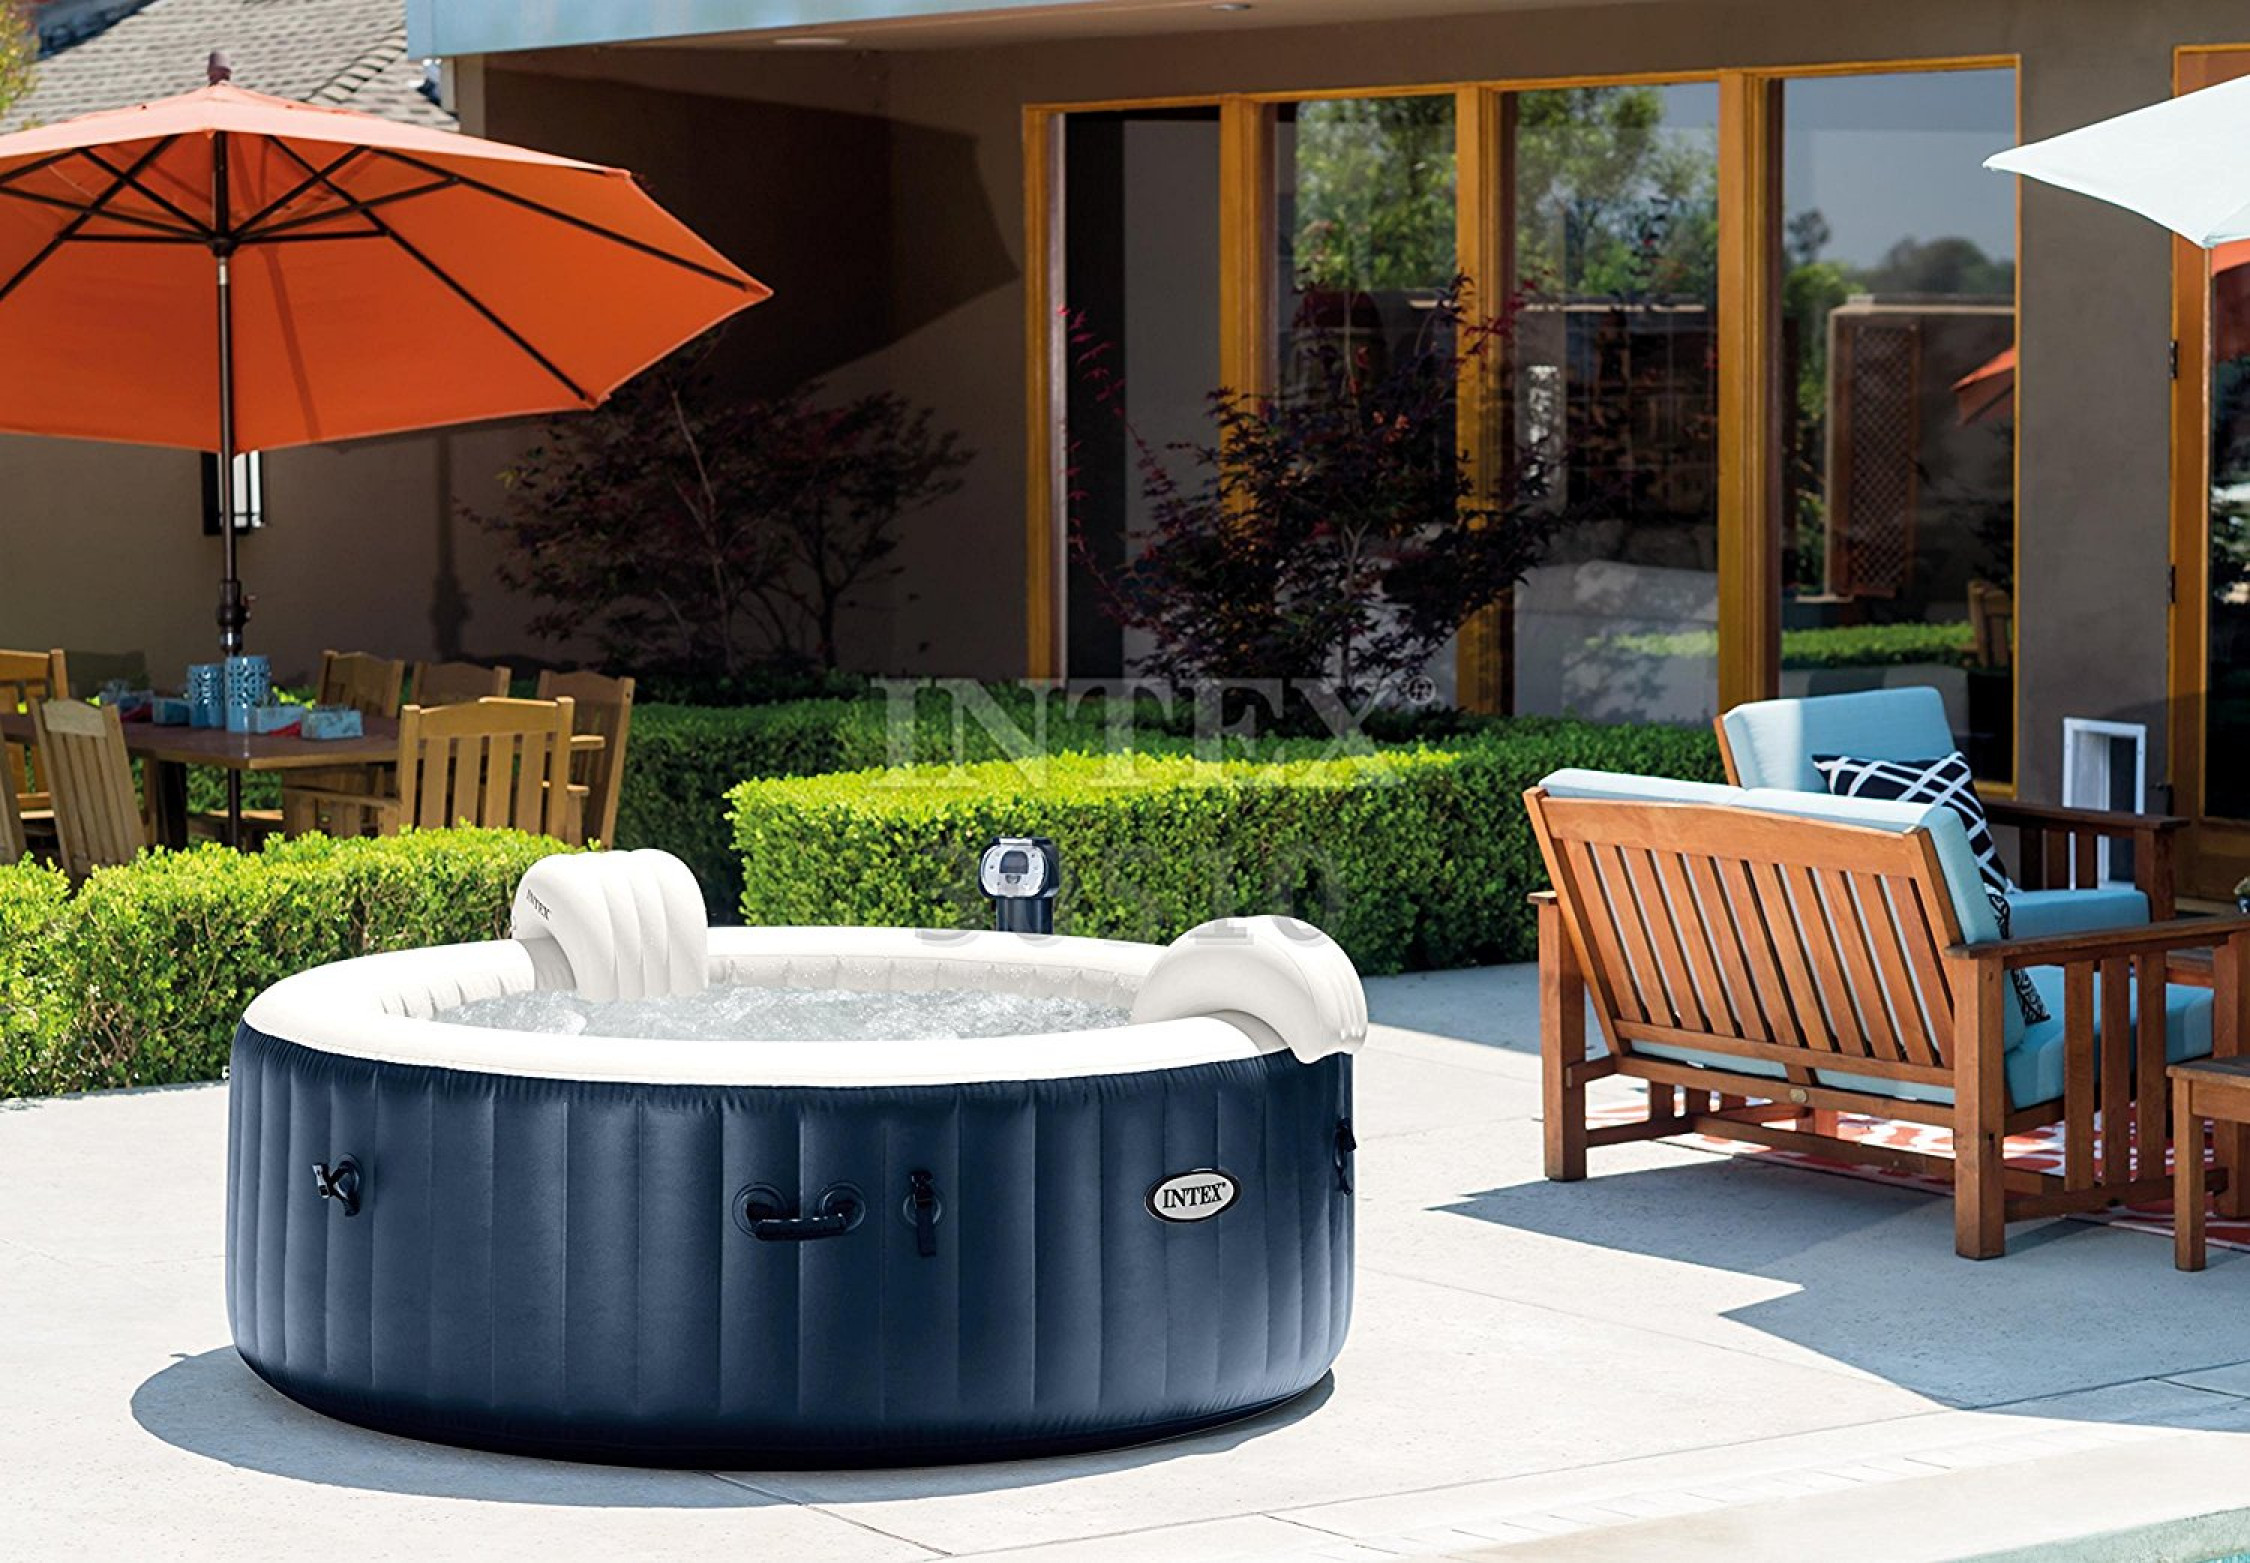 Intex Pure Spa 6 Person Inflatable Portable Heated Bubble Hot Tub For Sale From United States